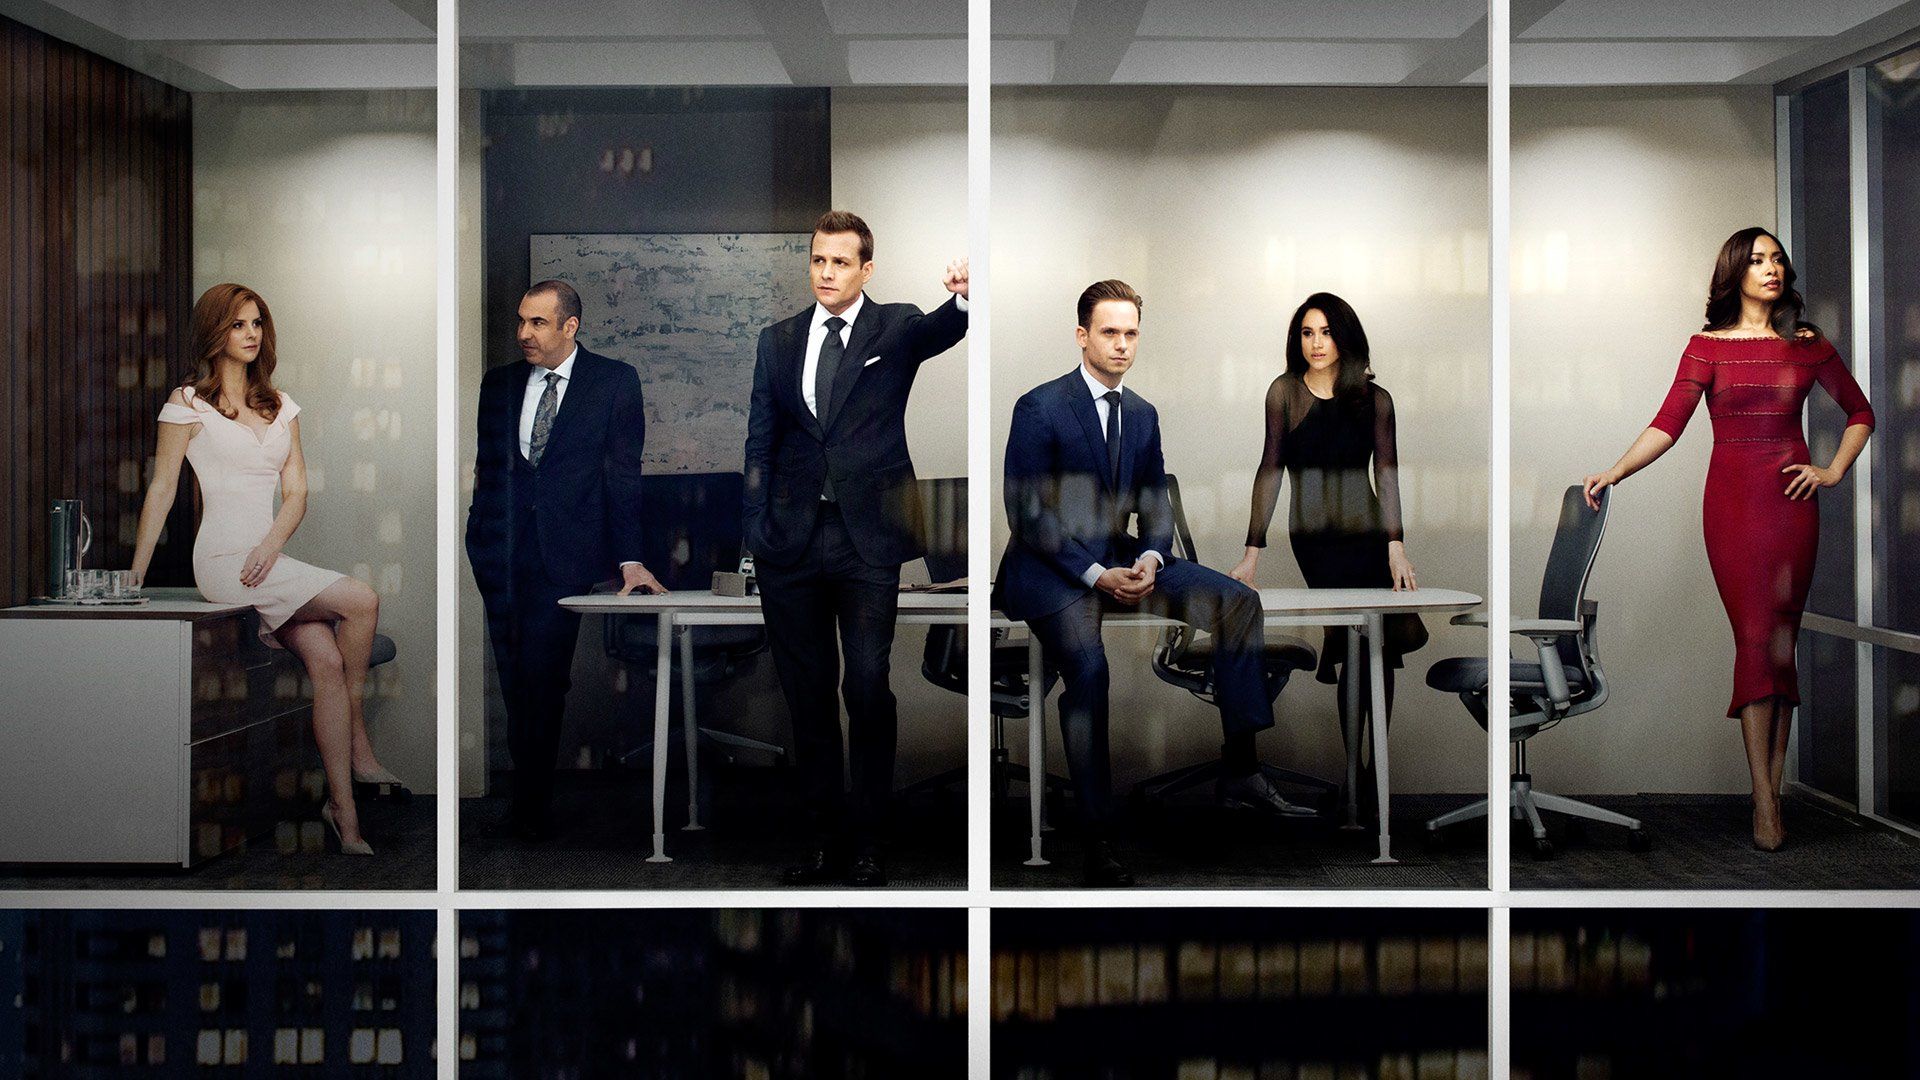 Suits Wallpaper Free Suits Background